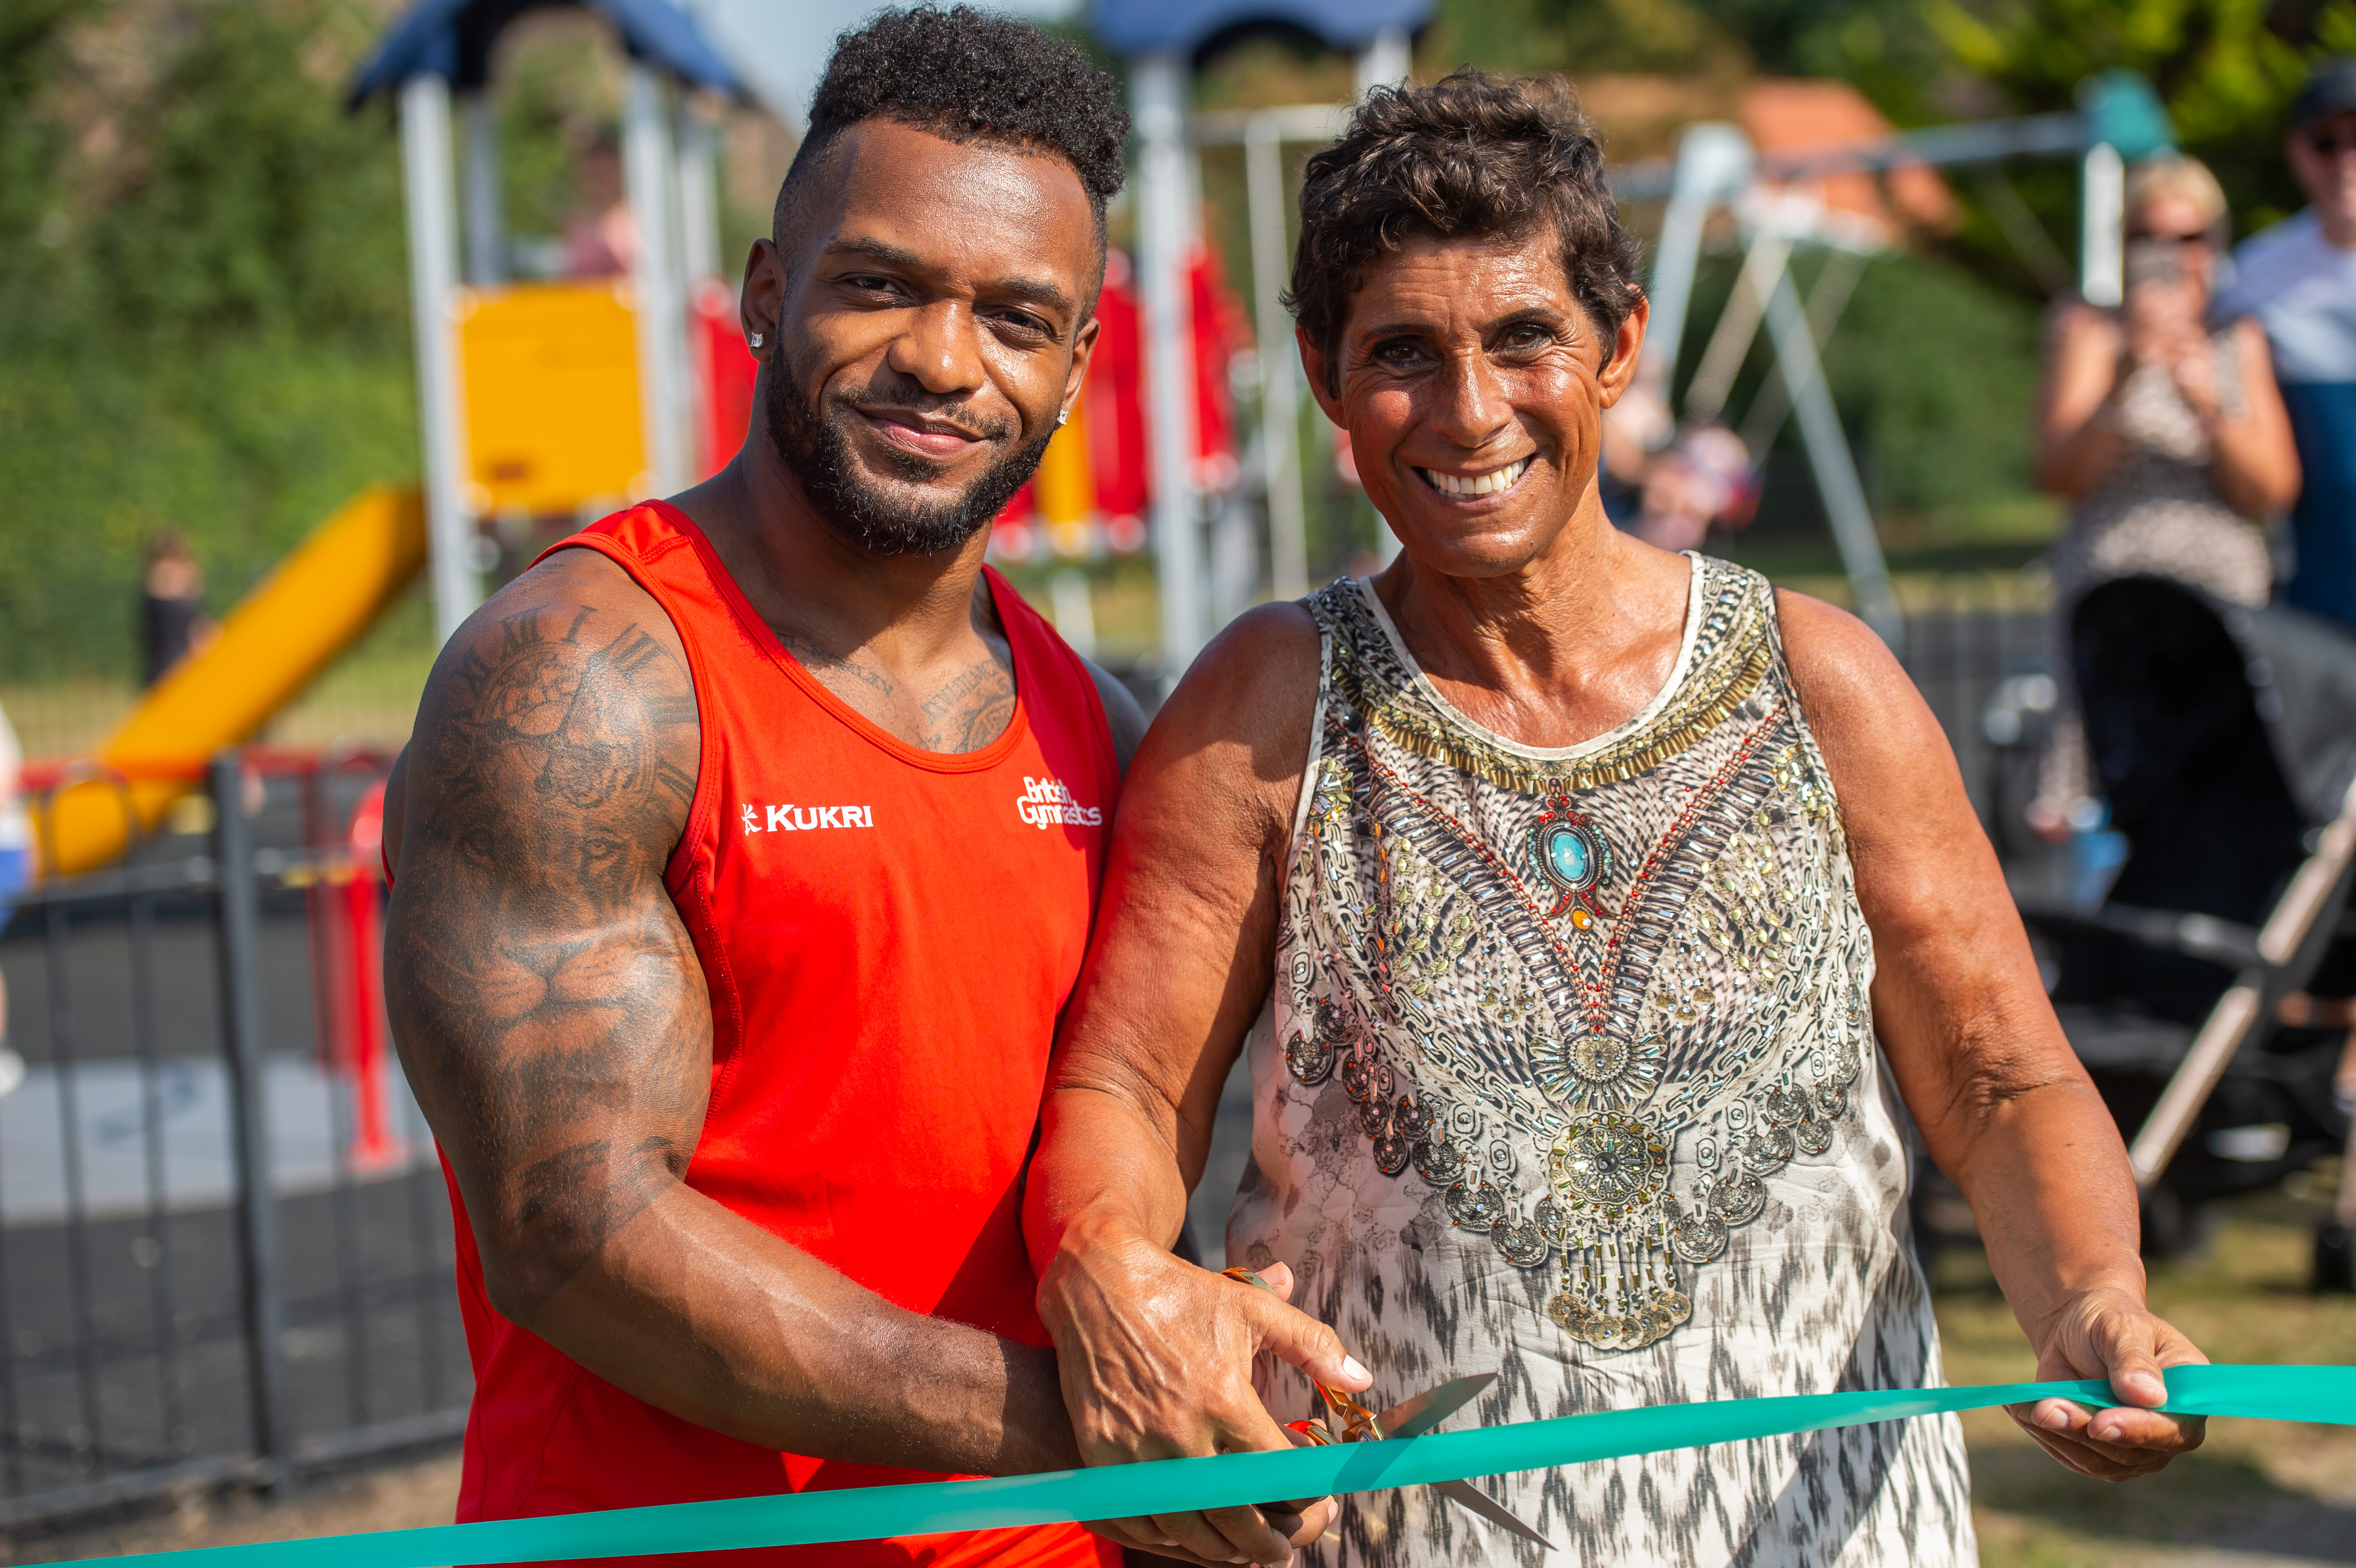 Strutt Memorial Recreation Ground (left GB gymnast Courtney Tulloch and right Fatima Whitbread MBE) - Photo credit to Bellway Essex